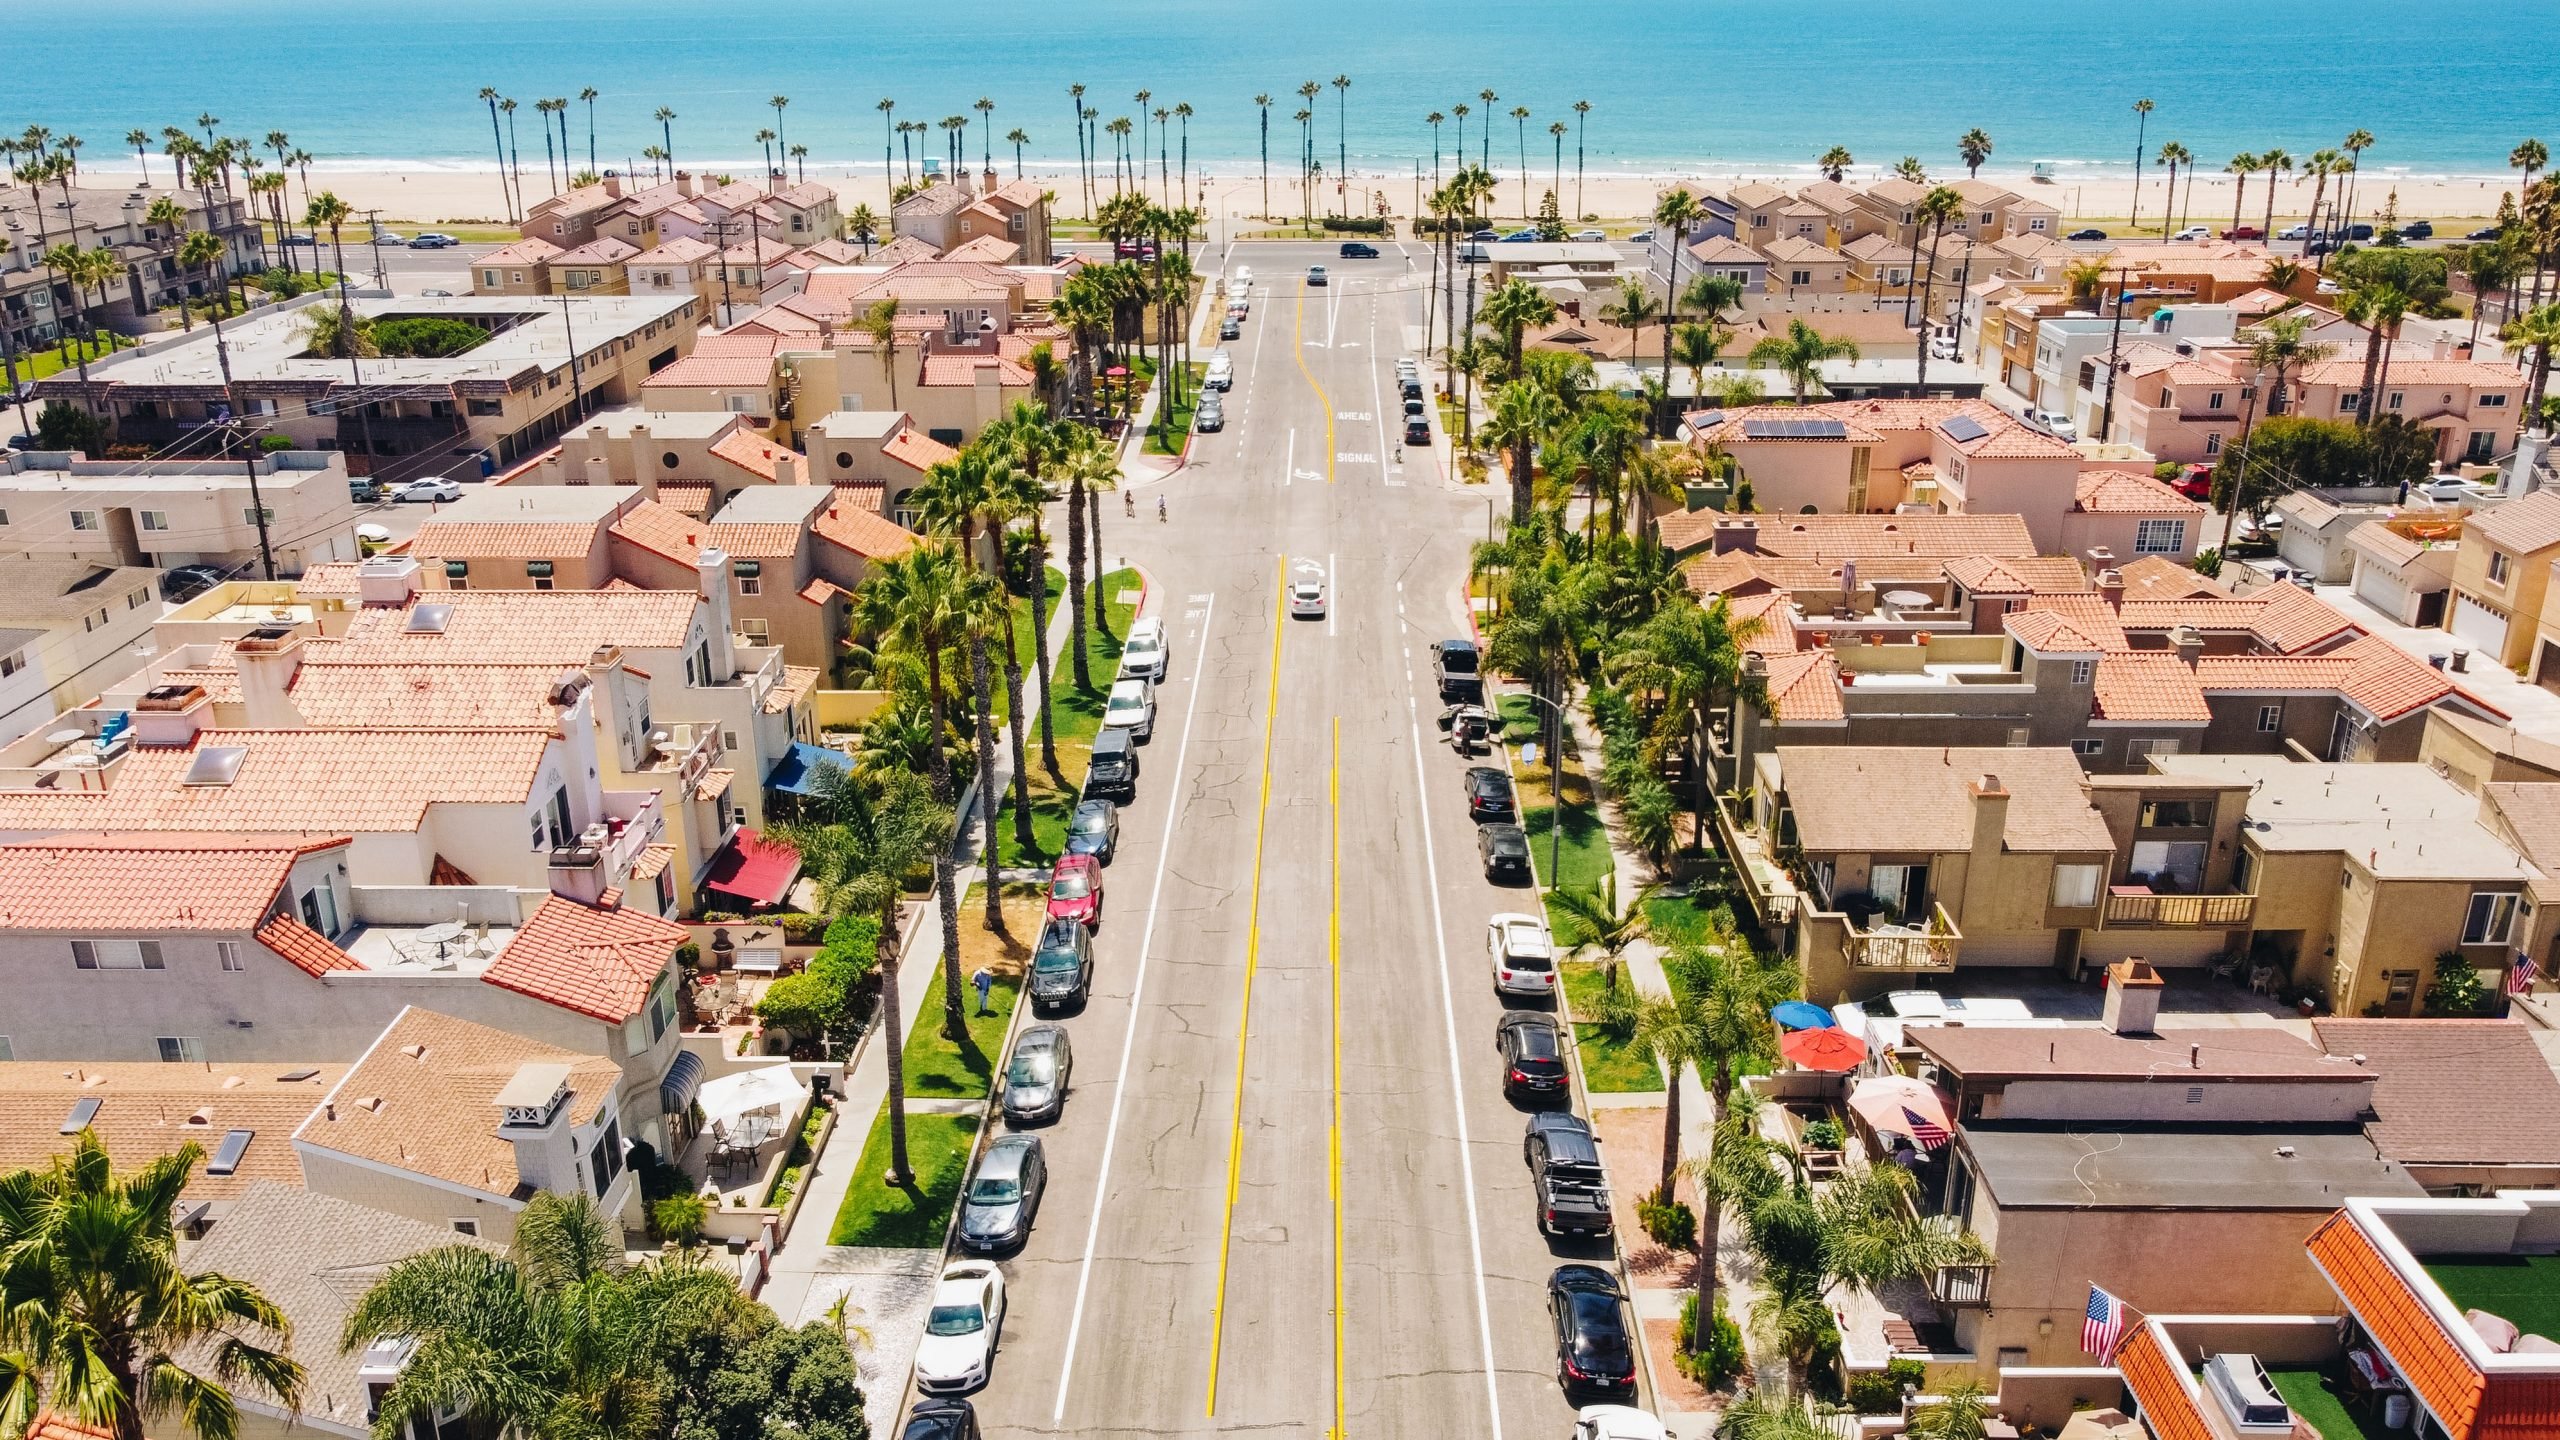 How To Get From Los Angeles Airport To Huntington Beach - All Possible Ways, cheapest way from Los Angeles airport to Huntington Beach, Los Angeles airport to Huntington Beach, Los Angeles shuttle Bus Airport, Los Angeles Airport Bus To Huntington Beach, OCTA Buses in Los Angeles, Los Angeles to Huntington Beach